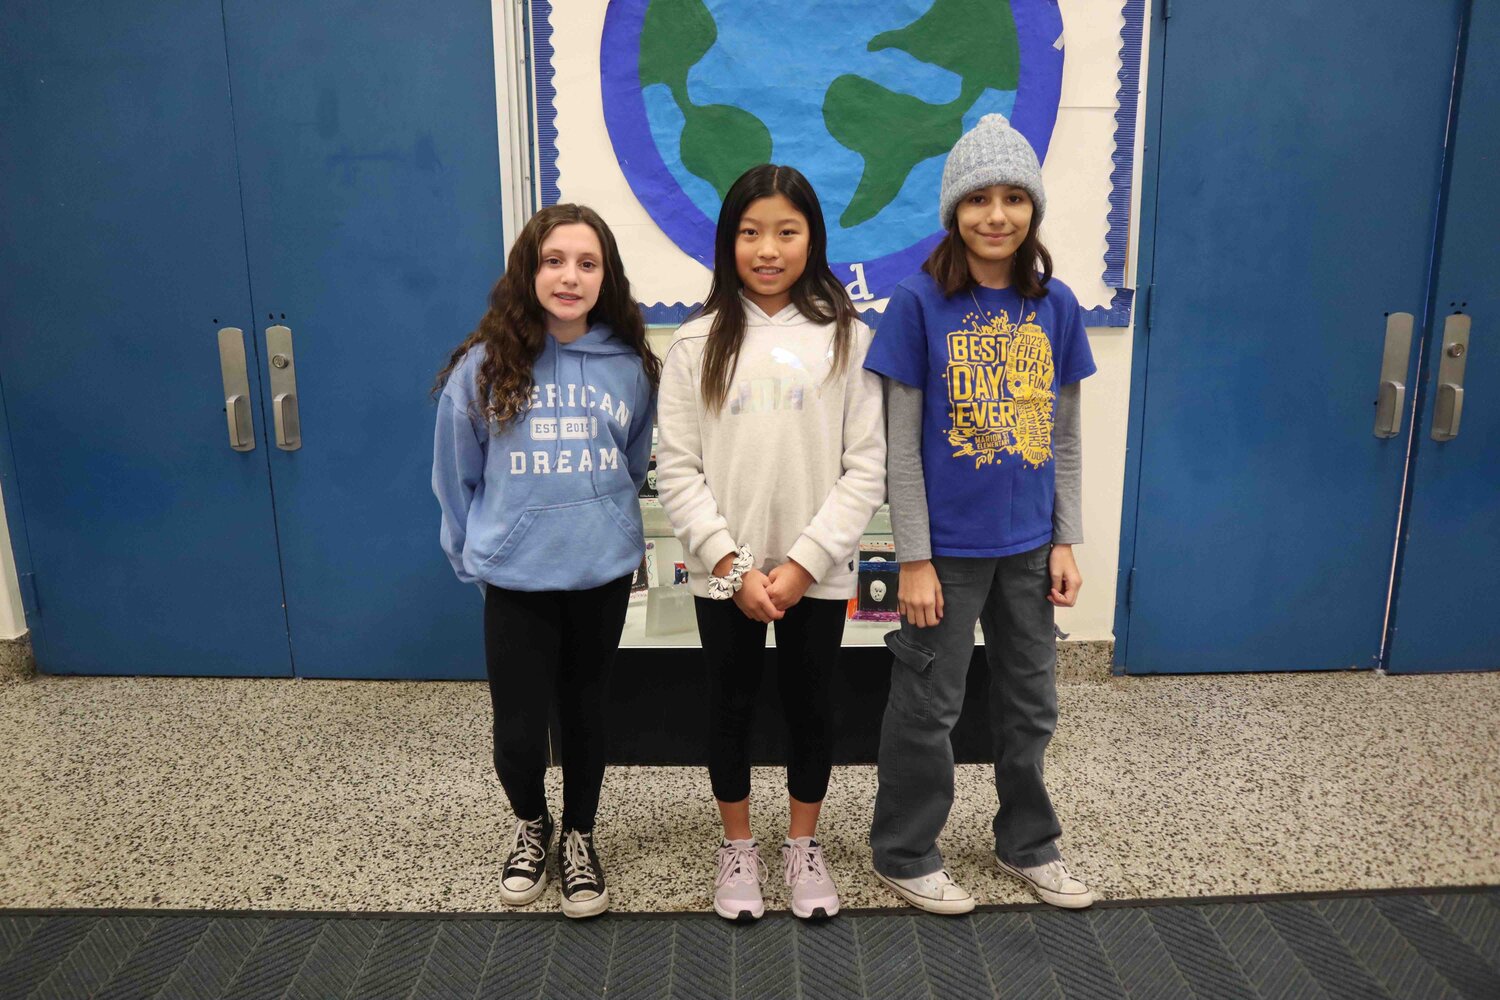 Marion Street students were selected to have their art displayed in Nassau All-County Art Exhibition in March.